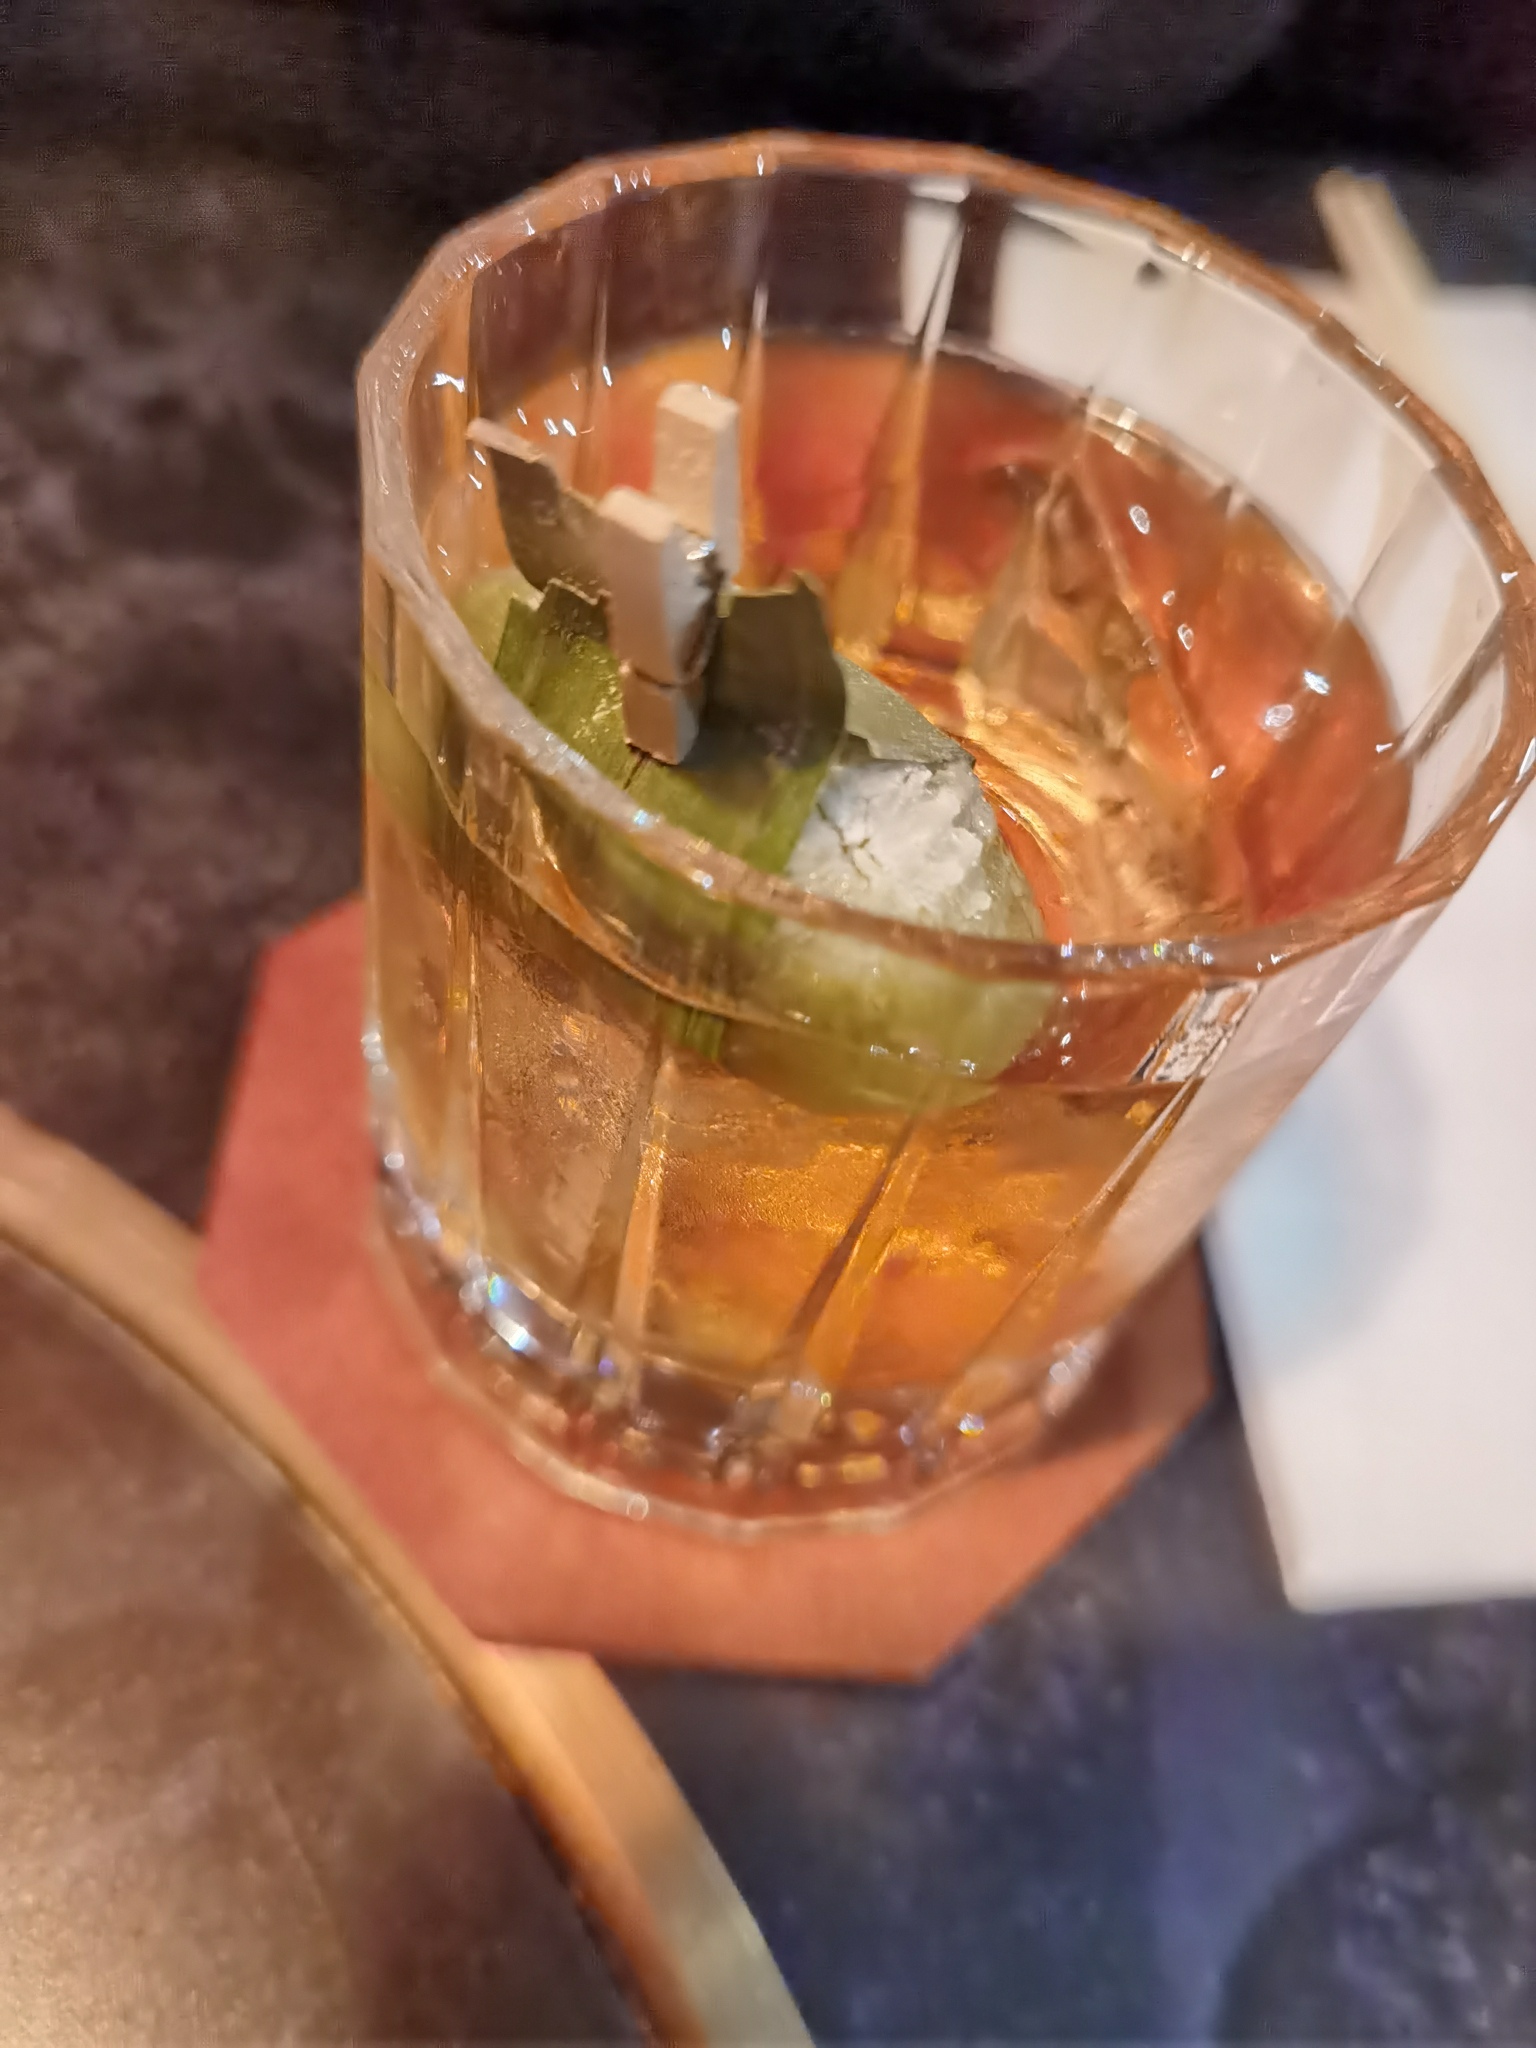 Shennong Old Fashioned - have you ever seen a mochi clamped into a cocktail before? Now you have!